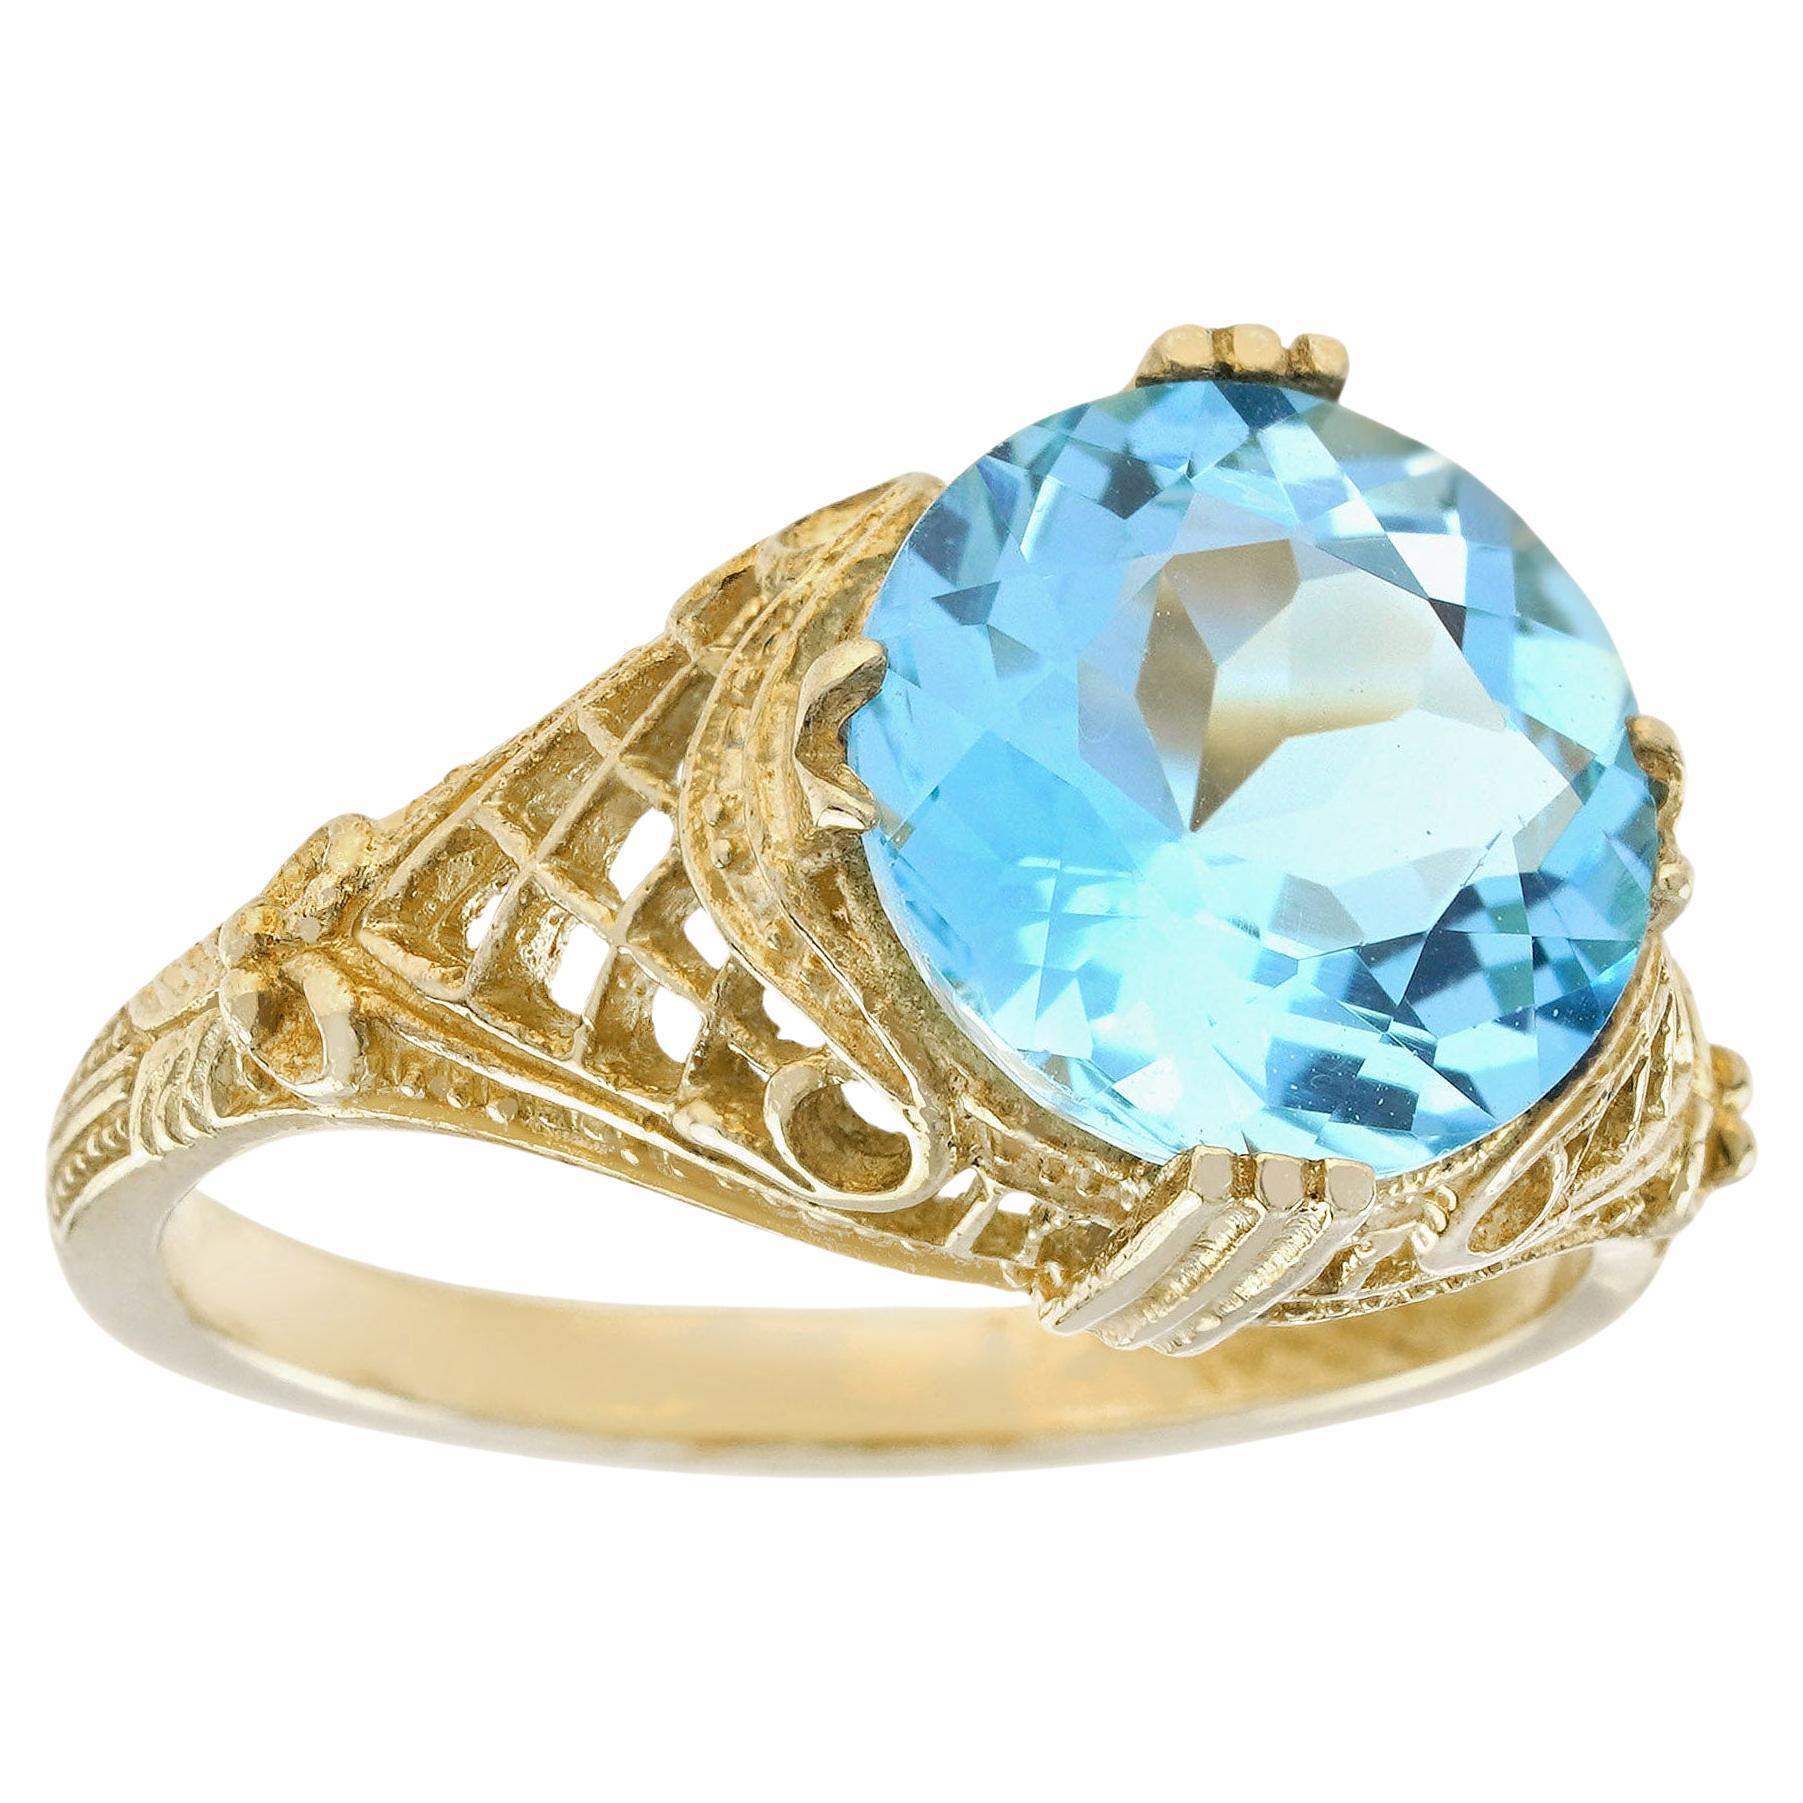 Natural 4.5 Ct. Blue Topaz Vintage Style Filigree Ring in Solid 9K Yellow Gold